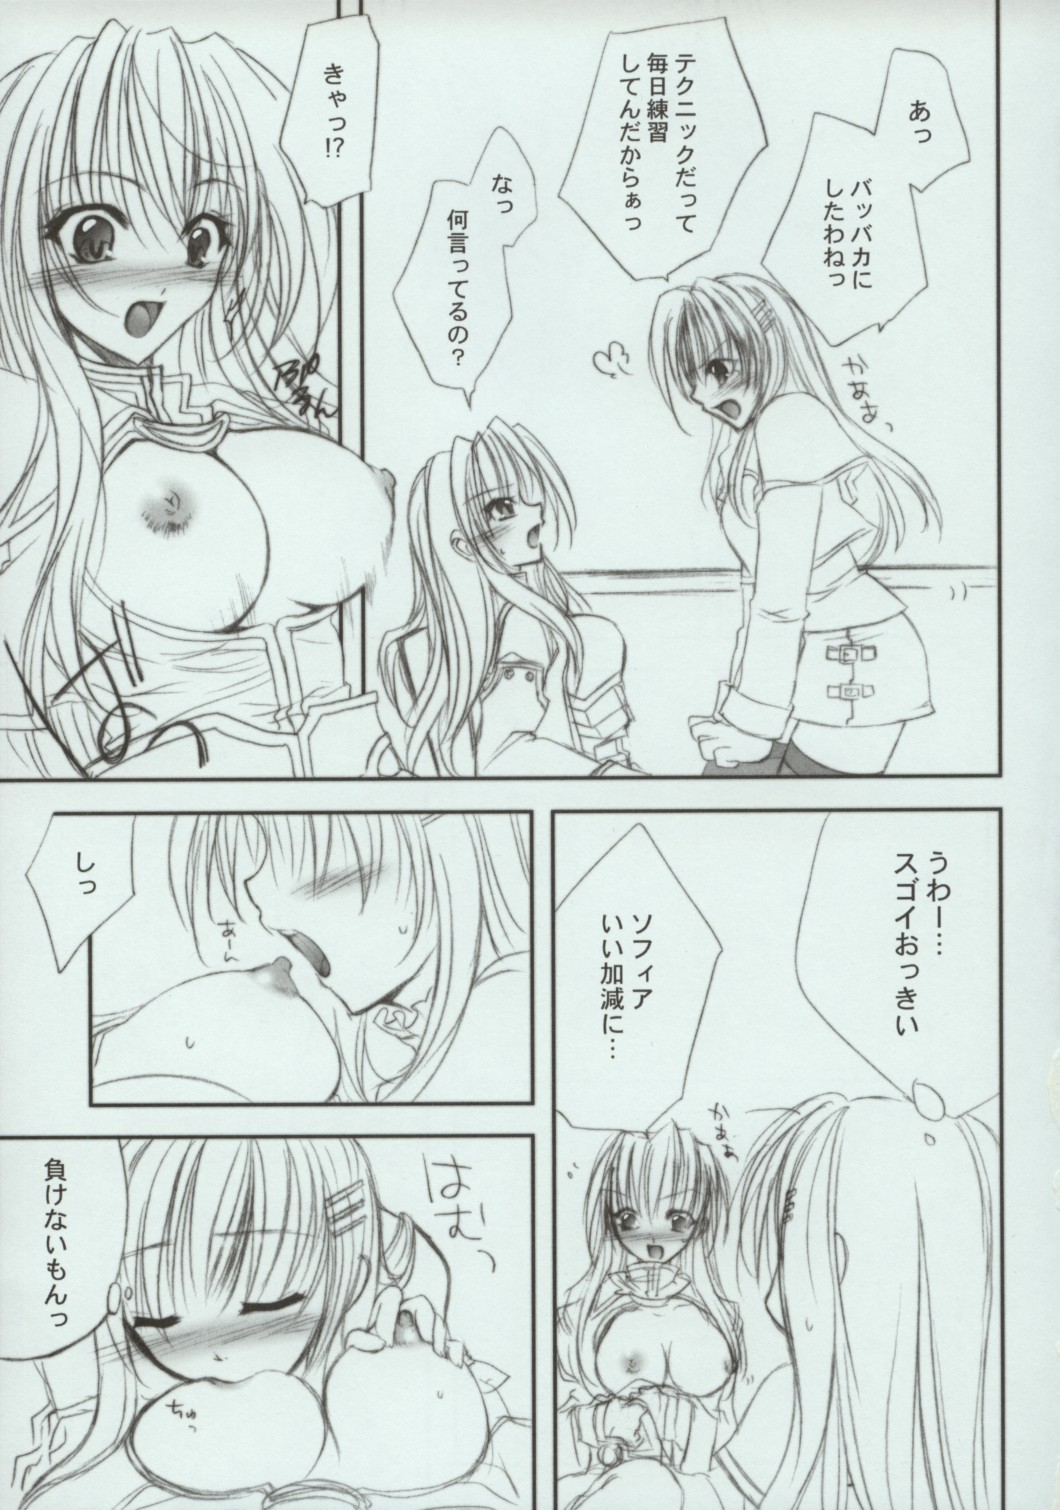 [Fantasy Wind (Shinano Yura)] FOLLOW (Star Ocean: Till the End of Time) page 6 full